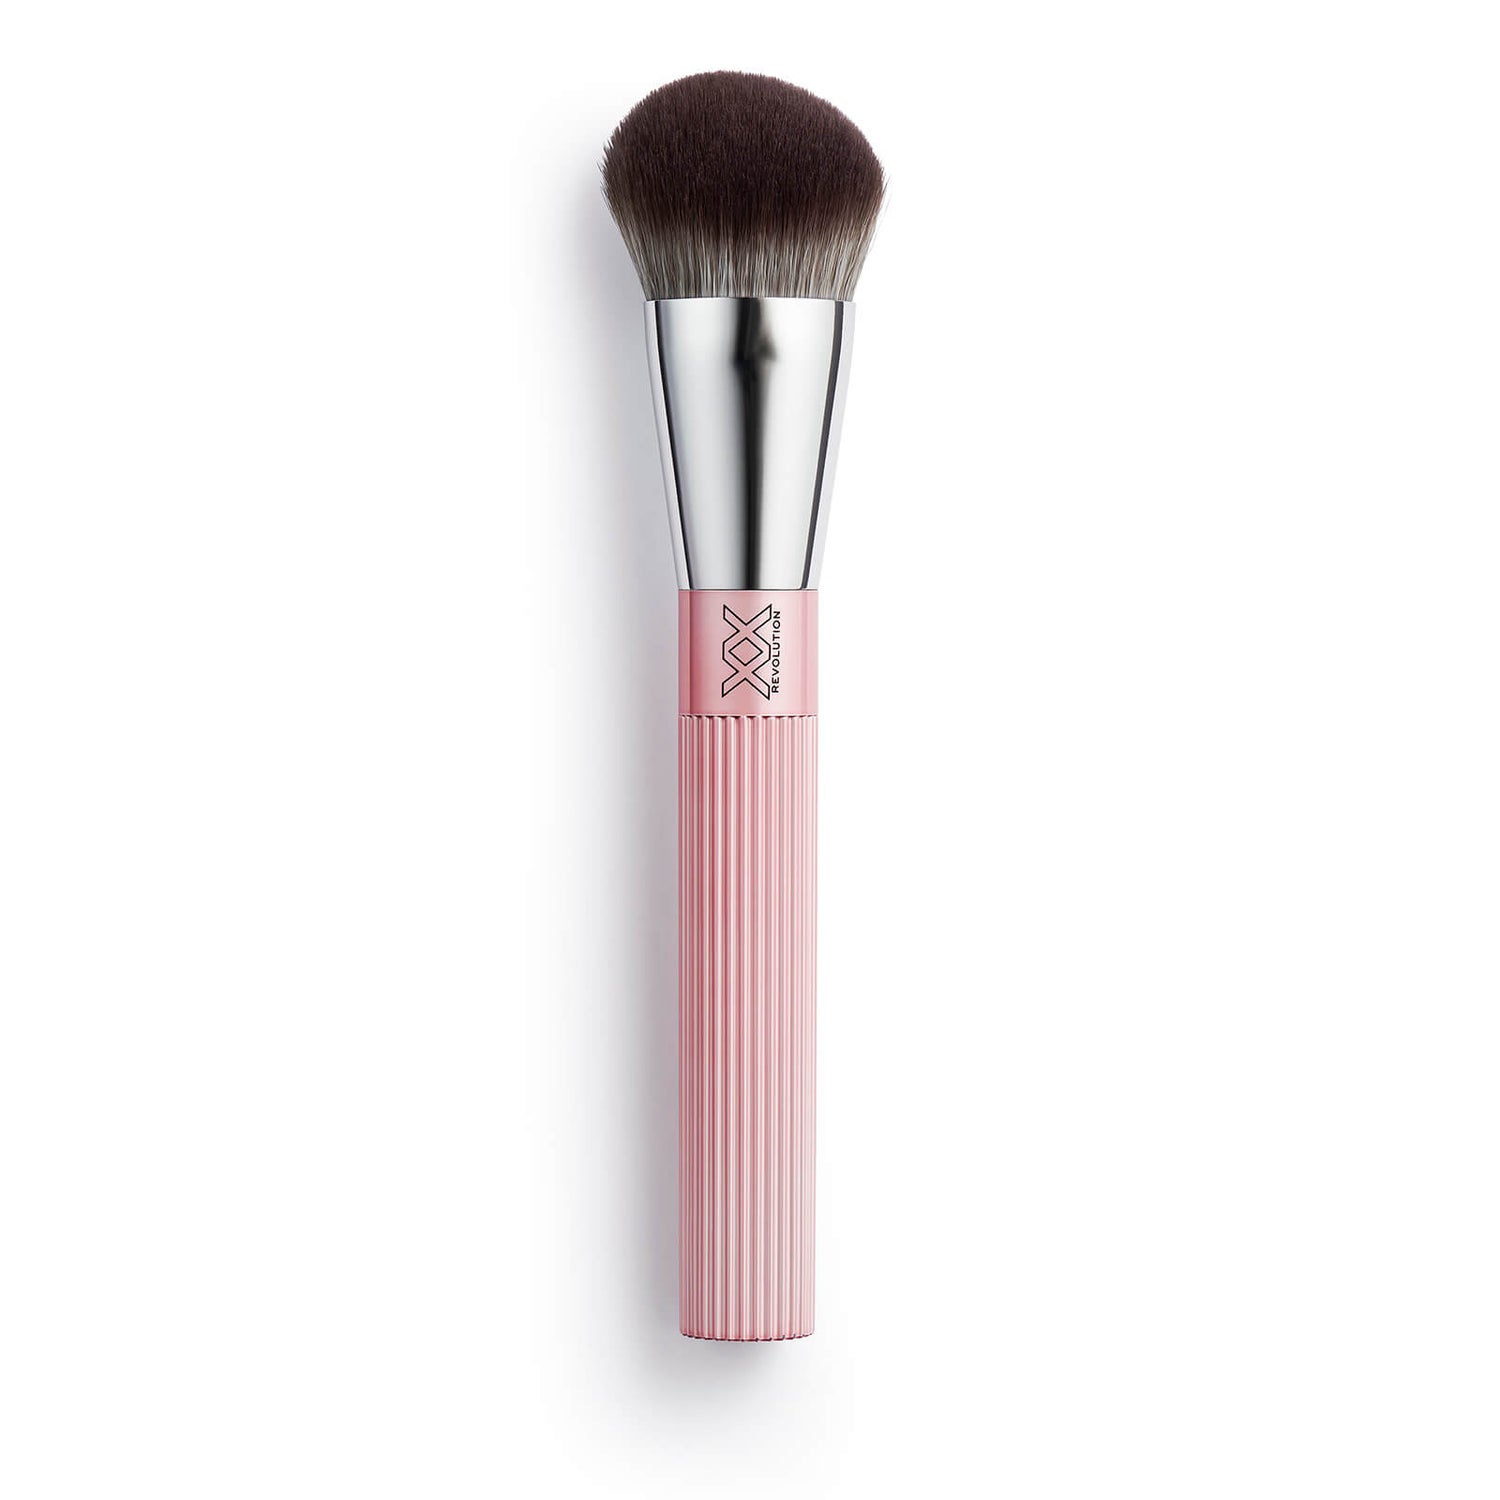 Xx Revolution Xxpert Brushes 'The Specialist' Angled Face Buffing Brush